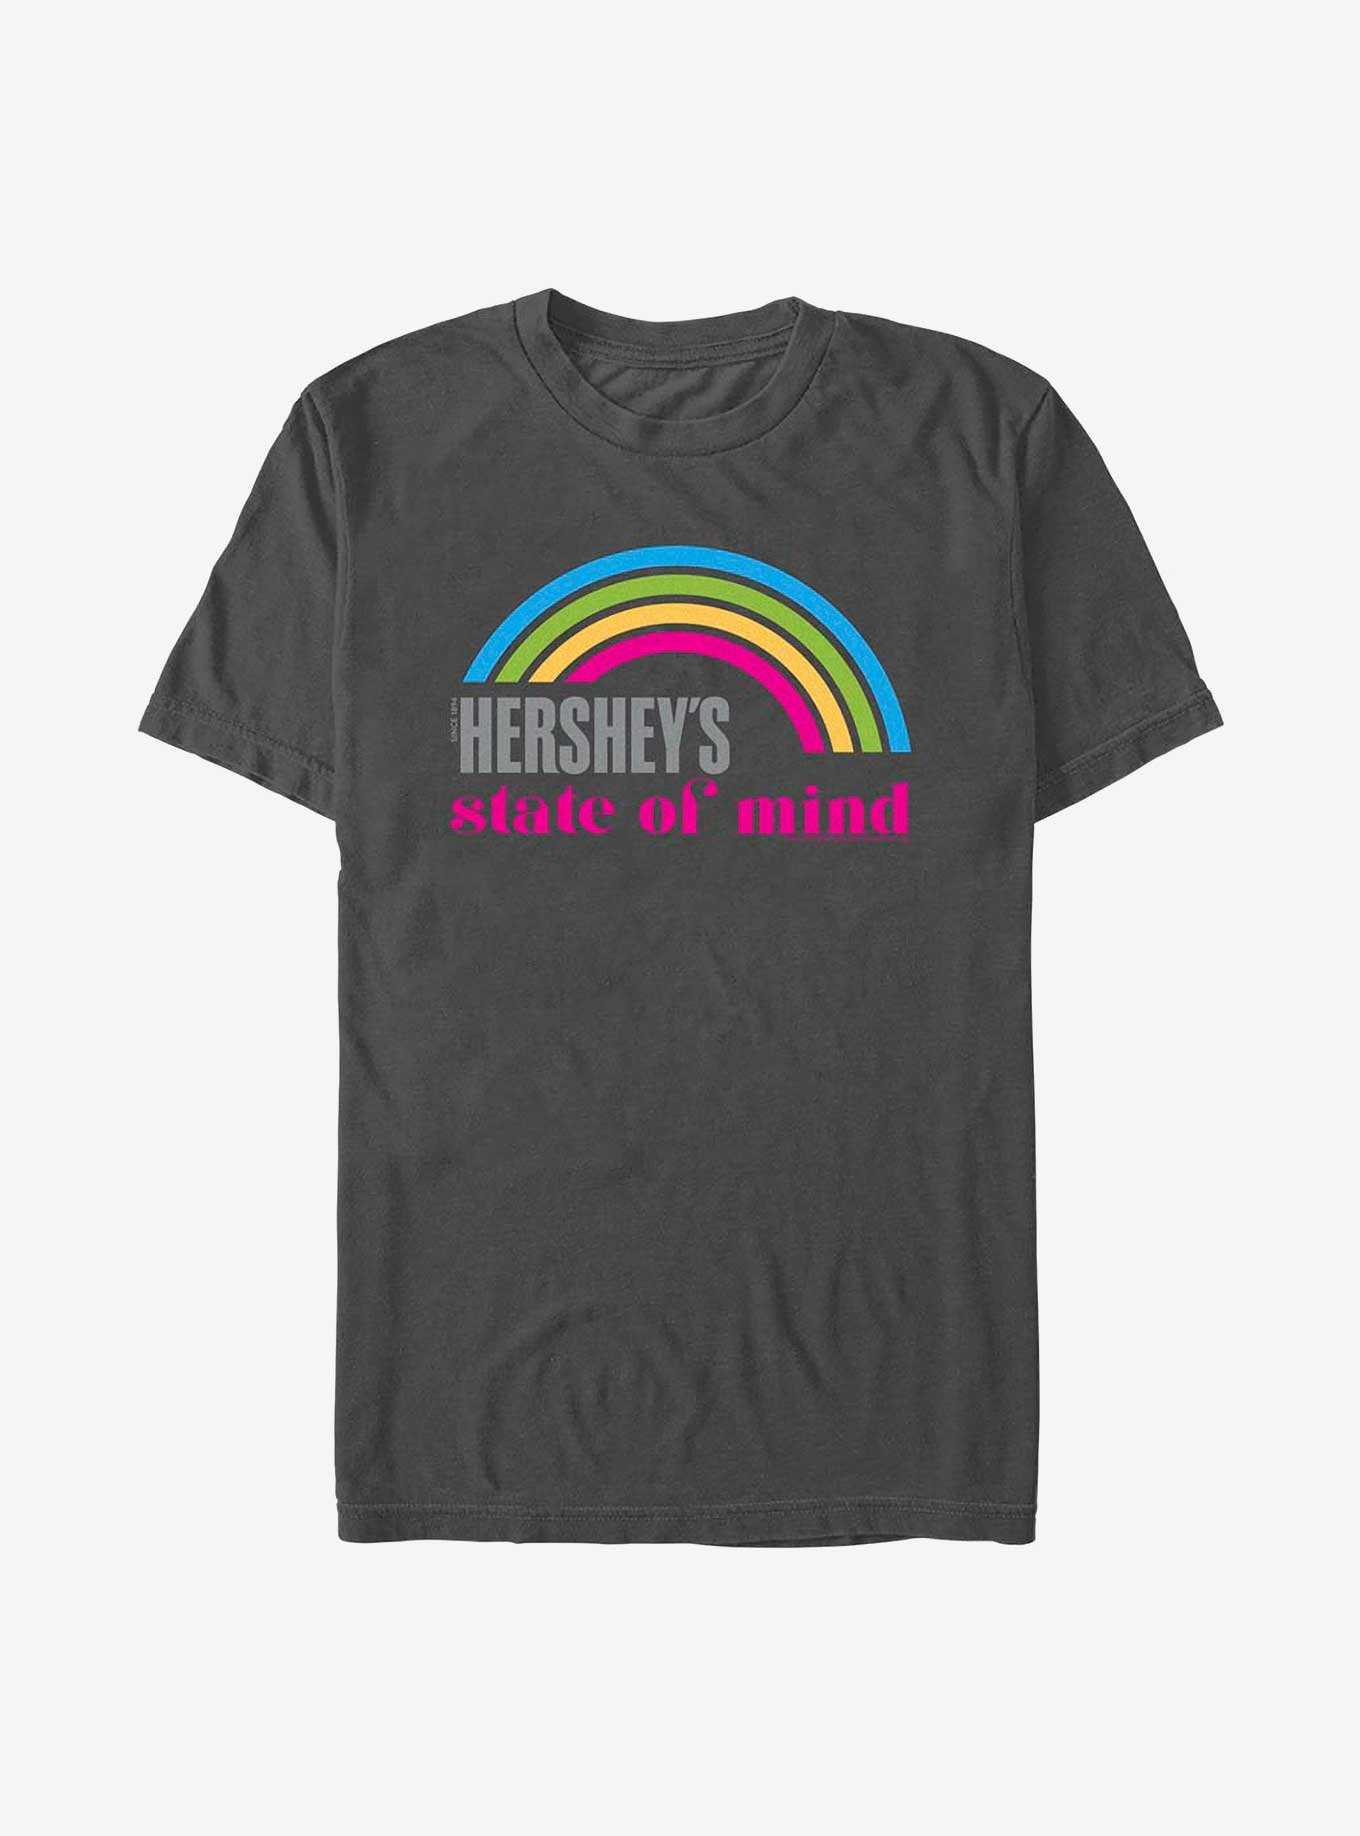 Hershey's State of Mind T-Shirt, , hi-res